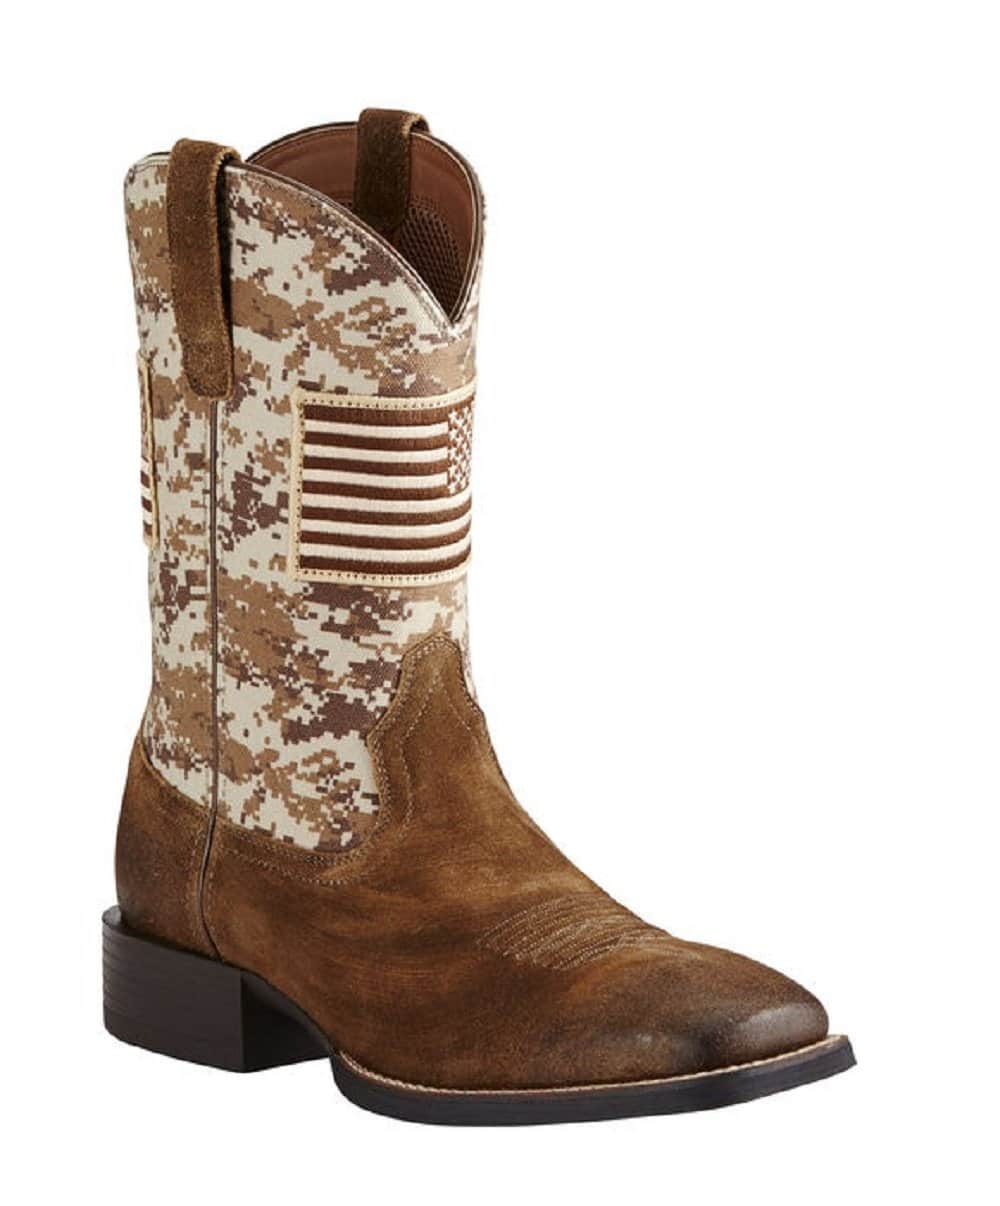 Details about   Ariat Men's Sport Patriot 11"Wide Sq.Toe Camo/Washed Suede Boot 10019959 $159.95 